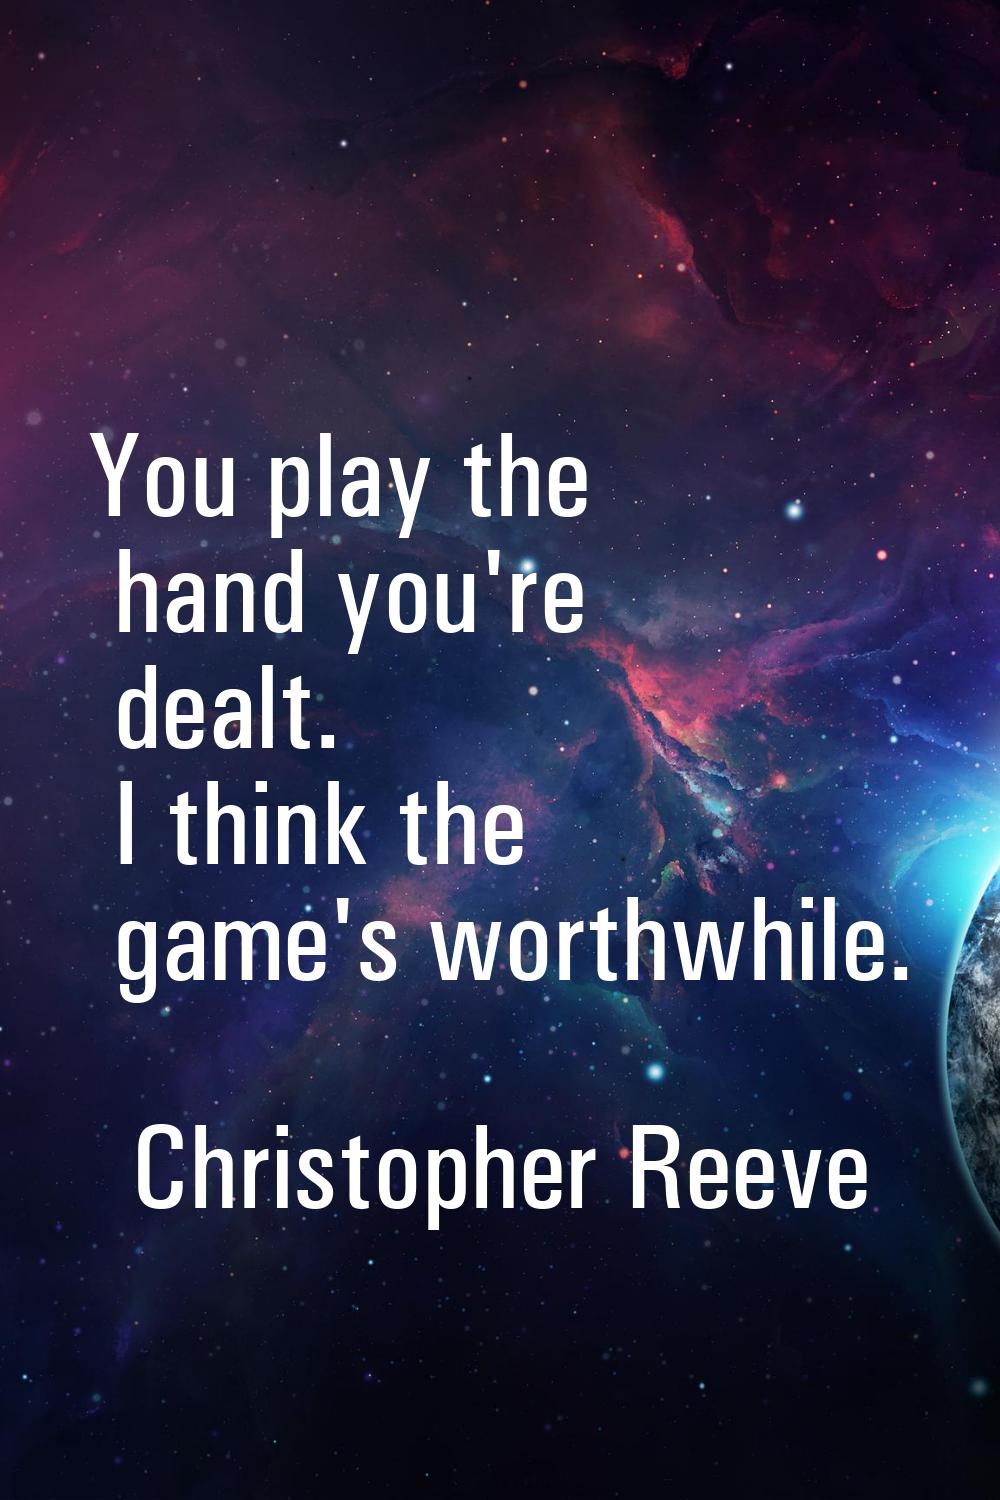 You play the hand you're dealt. I think the game's worthwhile.